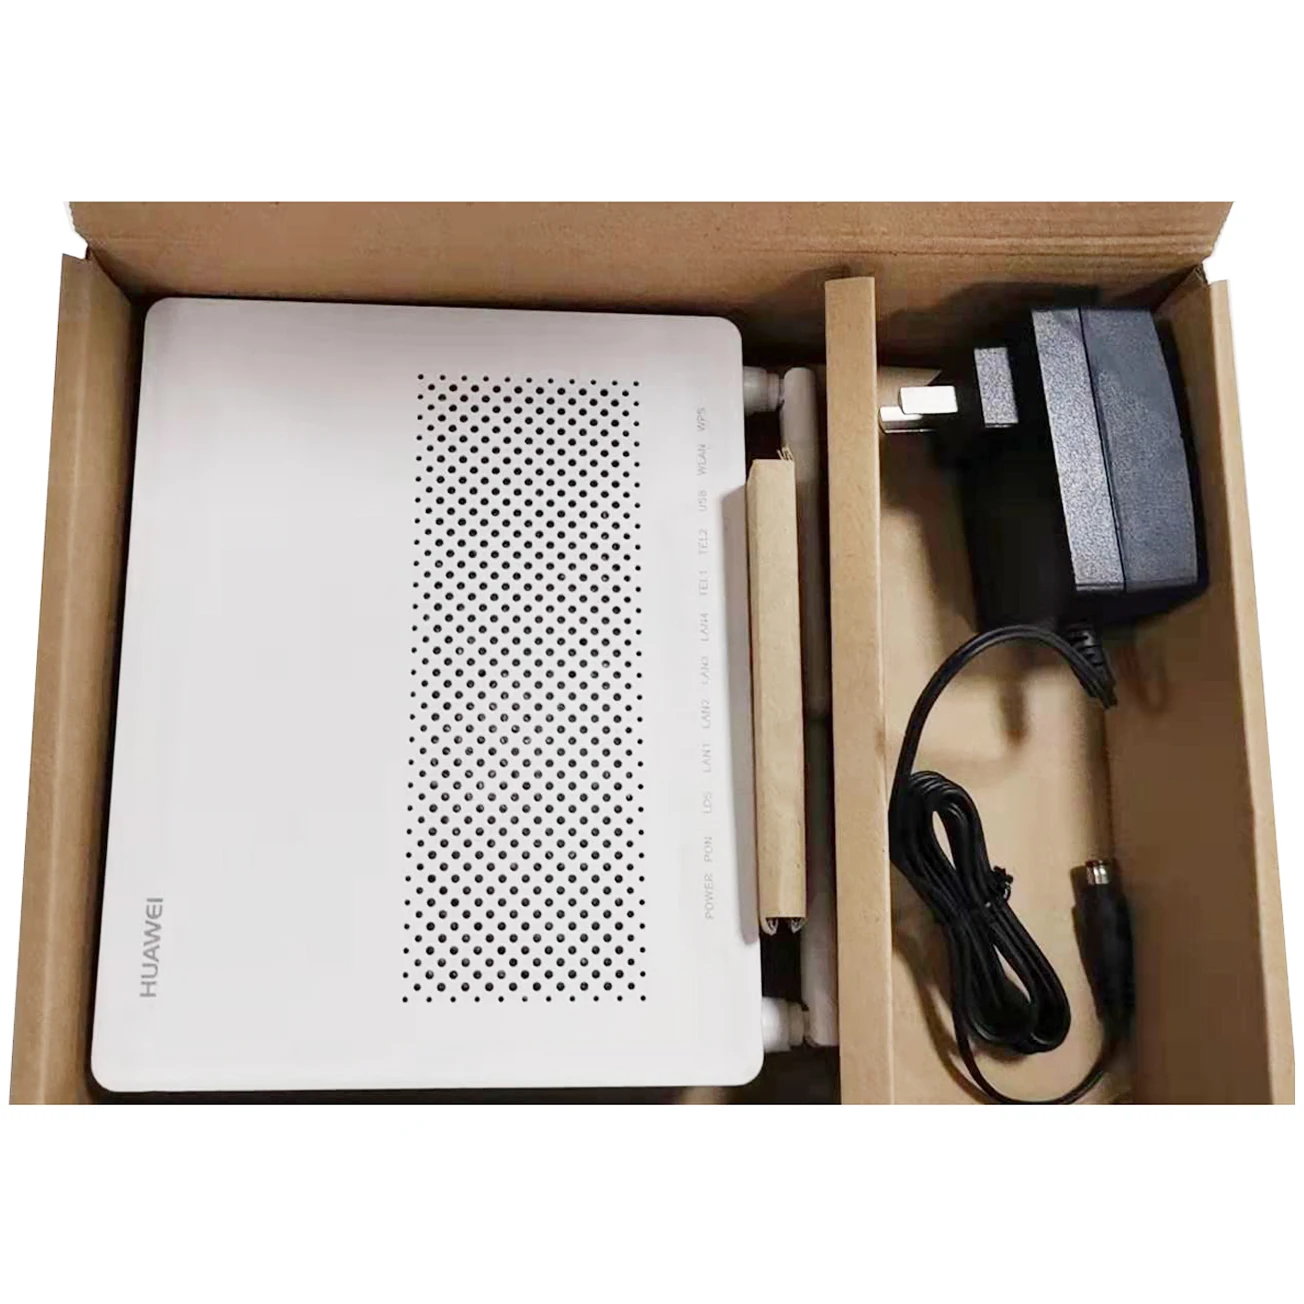 Huawei Onu 8245h With 4ge1voice2usb With 24gand5g Wifi Gpon Onu Ont Hg8245h Buy Hg8245hgpon 9502